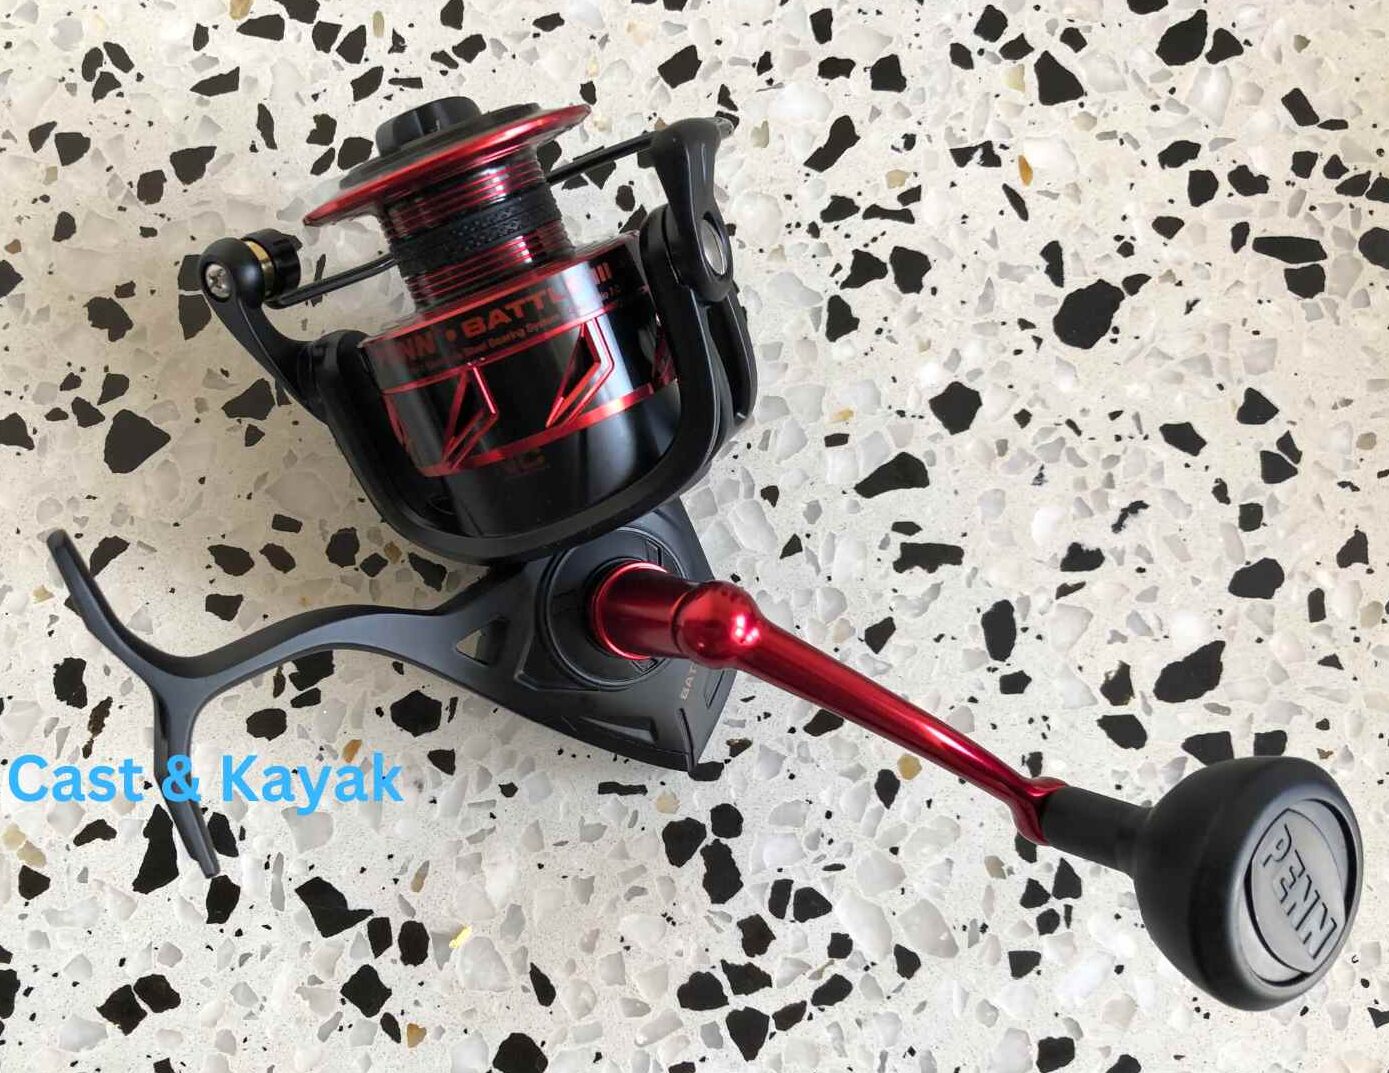 The fastest high-speed spinning reels - the Penn Battle 3 High Speed